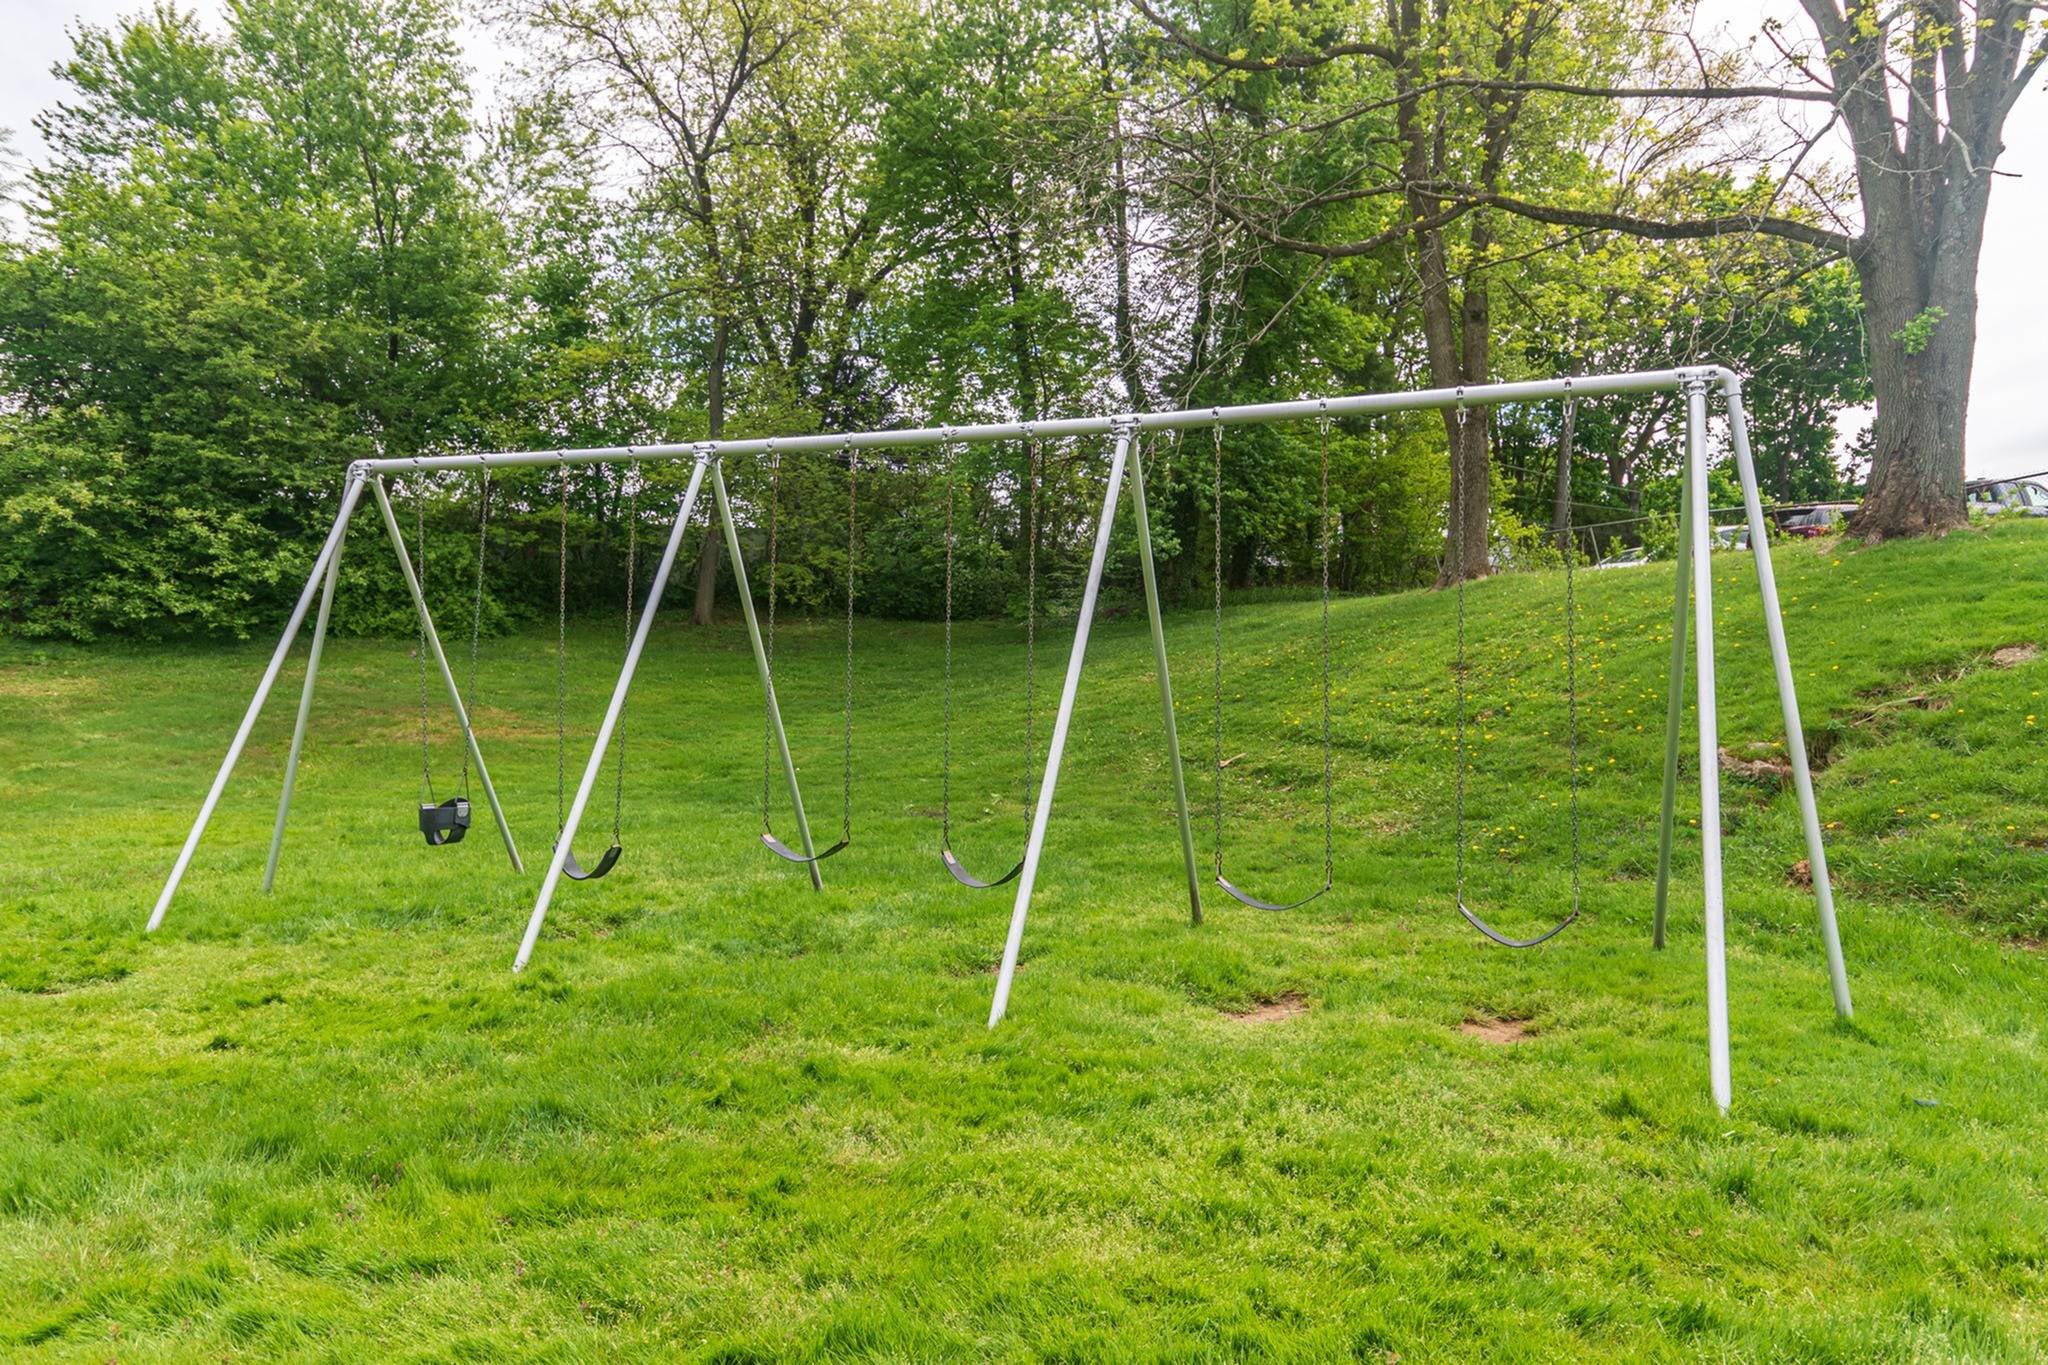 Swing set on the grass with trees behind it.